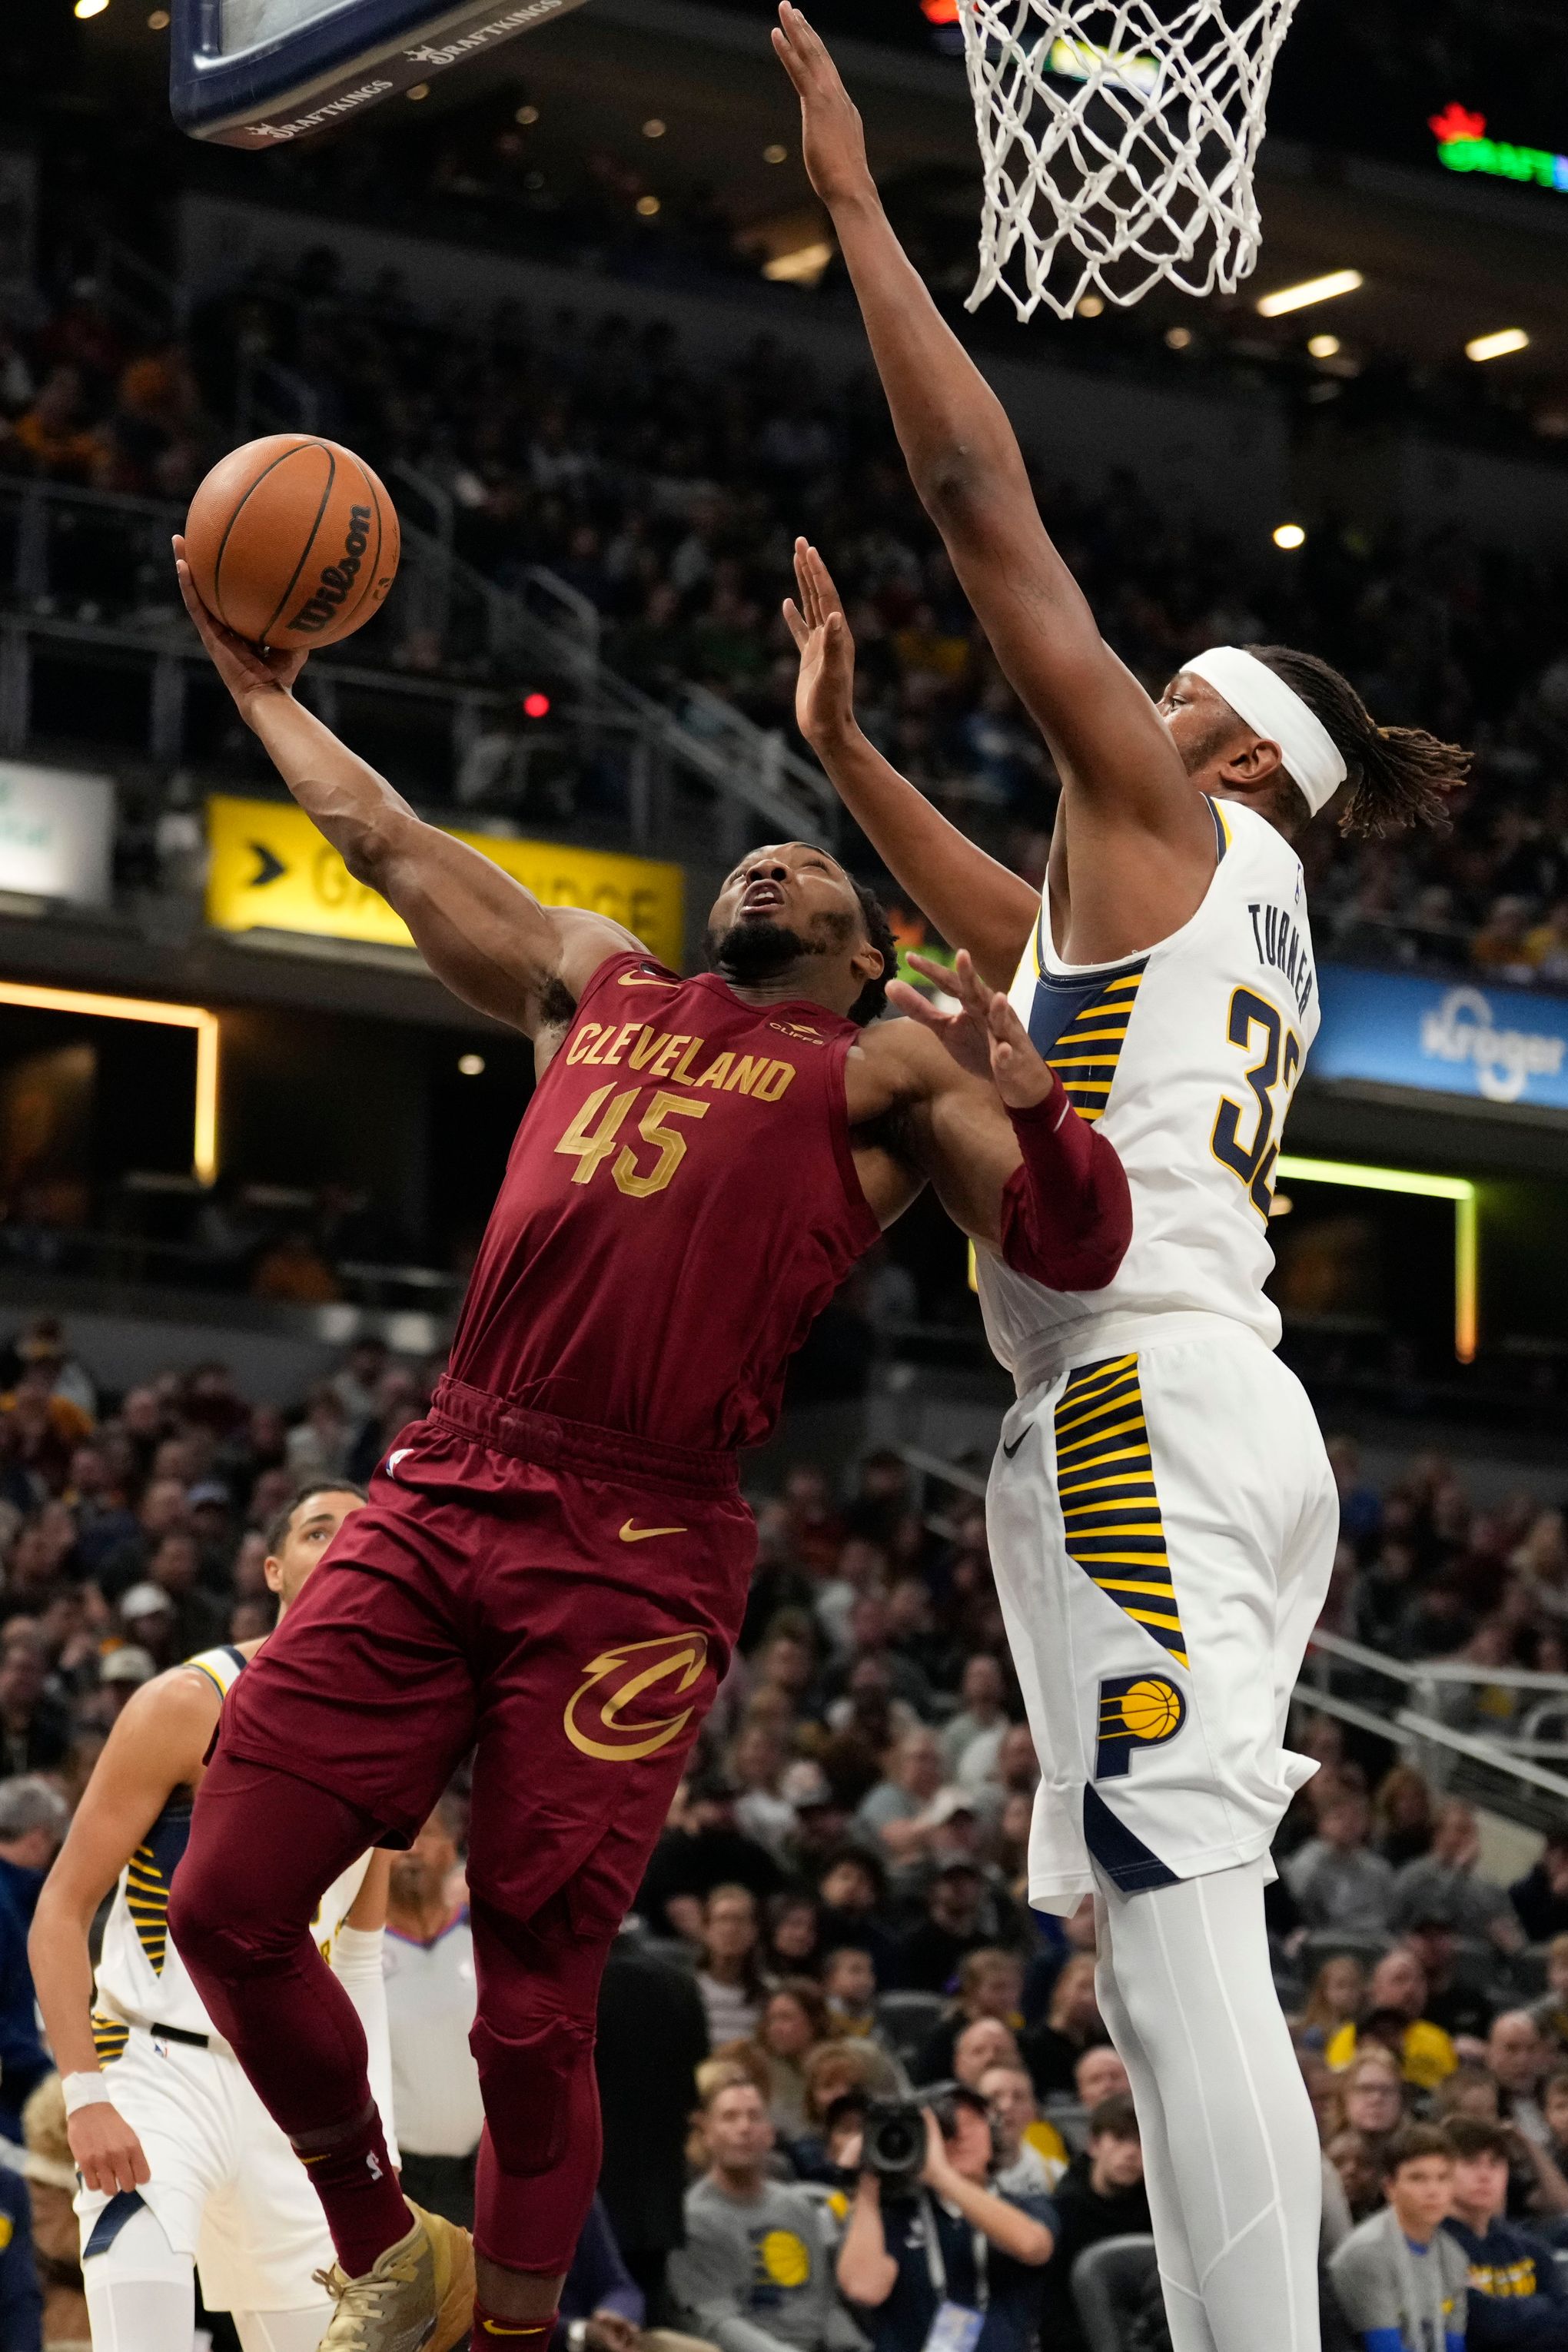 Pacers vs. Cavs: Everything you need to know about Aaron Nesmith's dunk